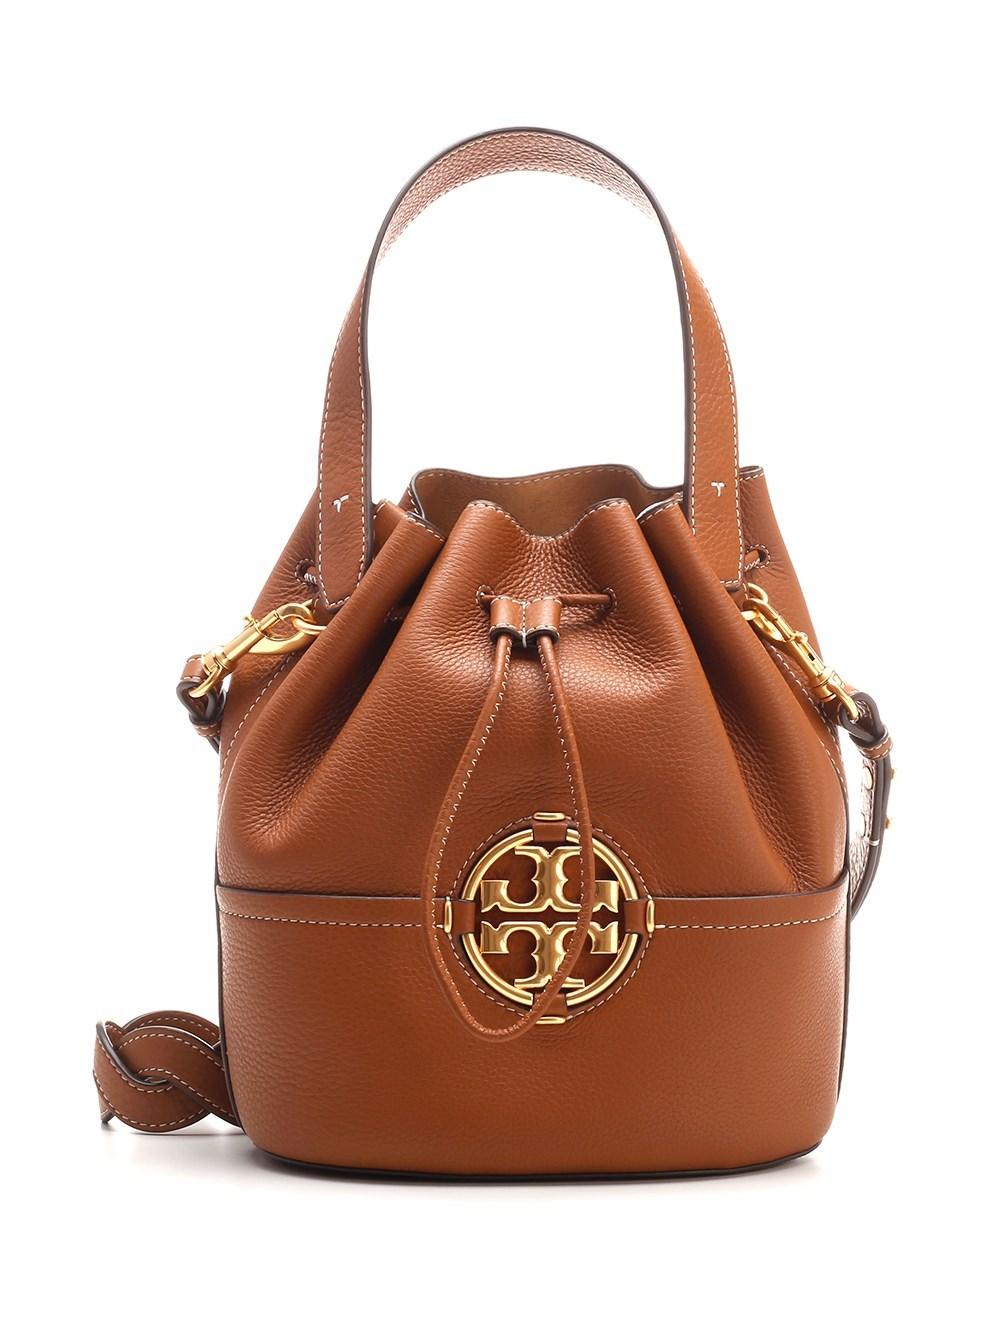 Top Quality Leather Tory Burch Bags For Womens - Goodsdream